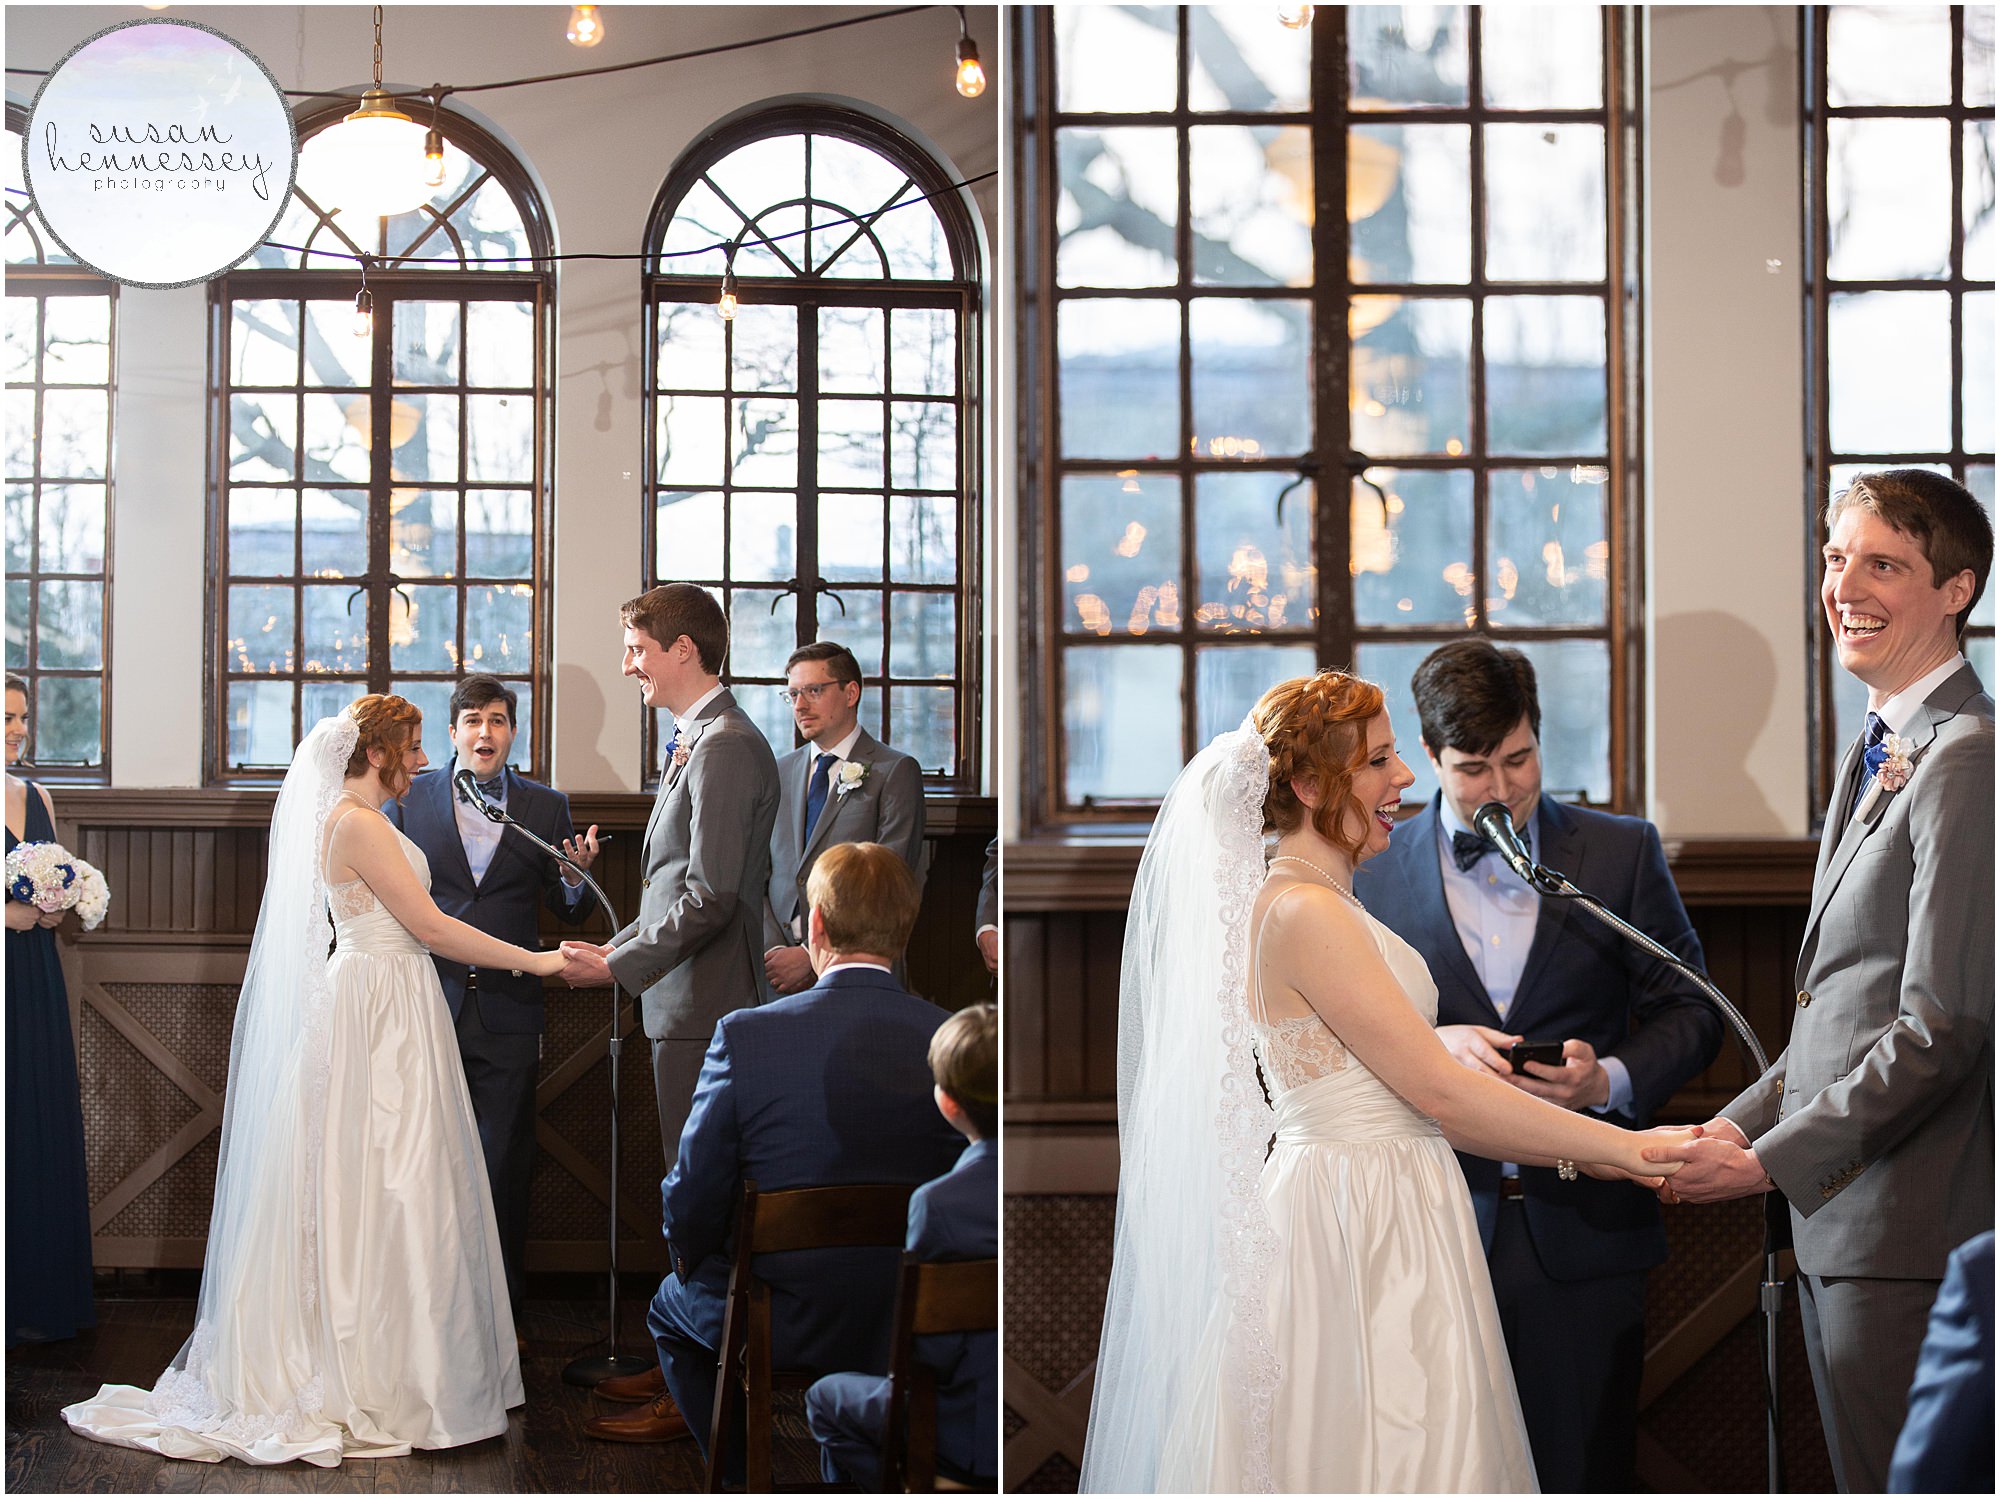 Indoor ceremony in the library at Moorestown Community House